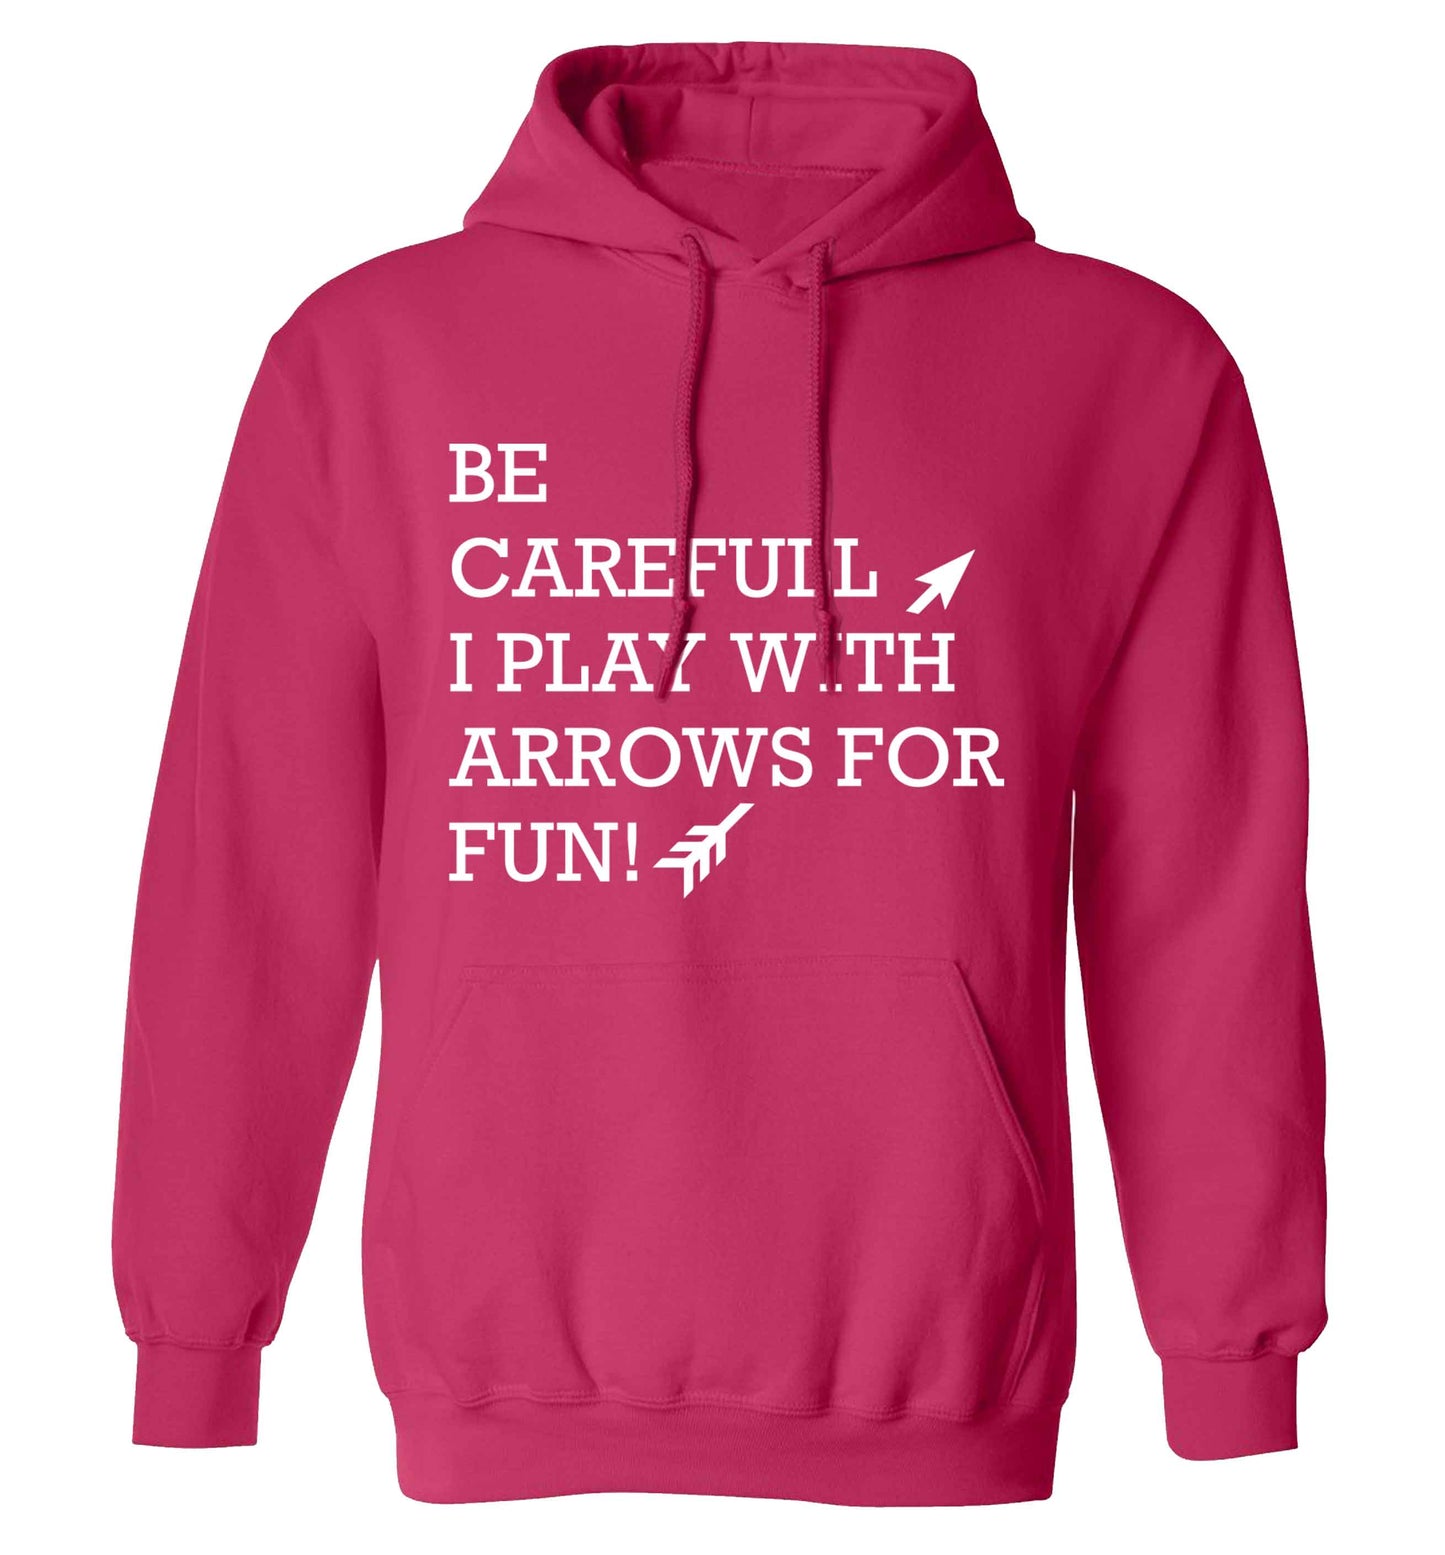 Be carefull I play with arrows for fun adults unisex pink hoodie 2XL